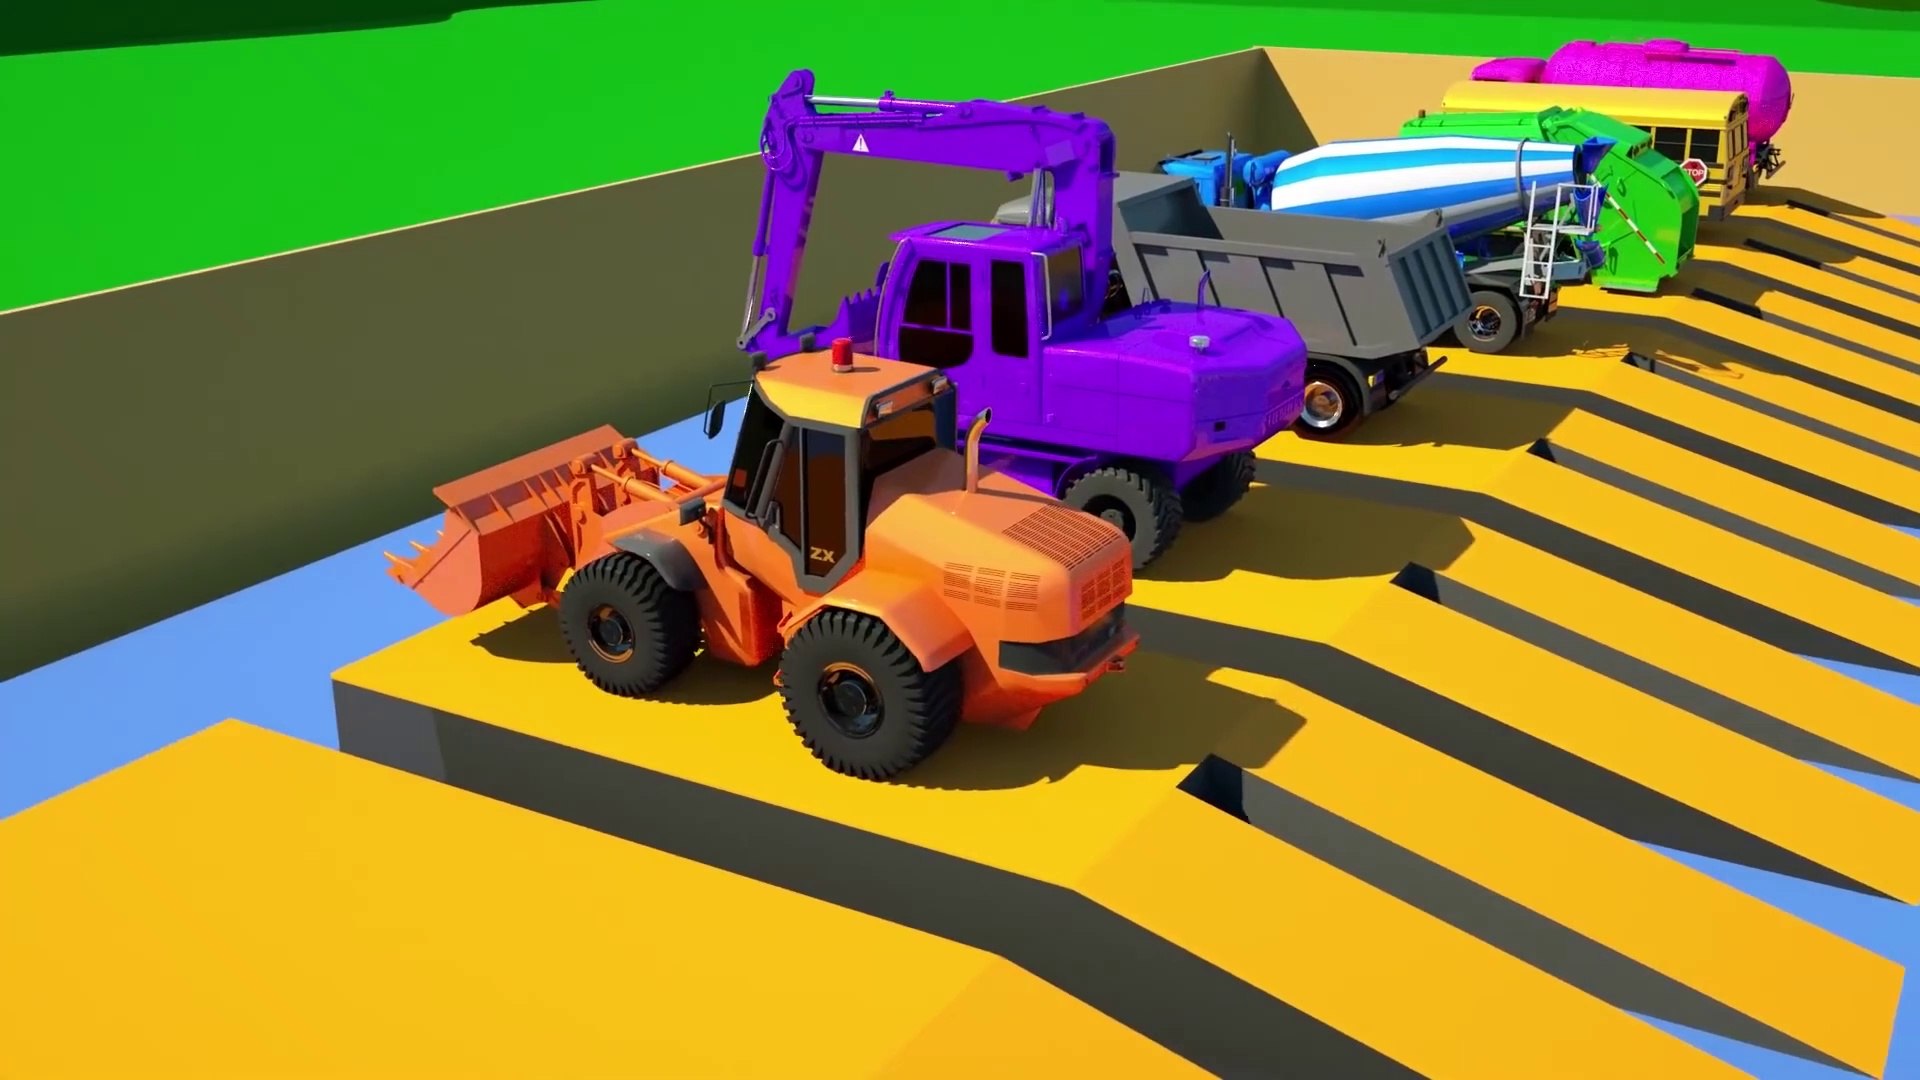 Learn Colors and Race Cars gadi ka cartoon - TOYS cartoon video gadi wala  Construction Truck for Kids with the Excavator Dump Truck and Bulldozer -  video Dailymotion